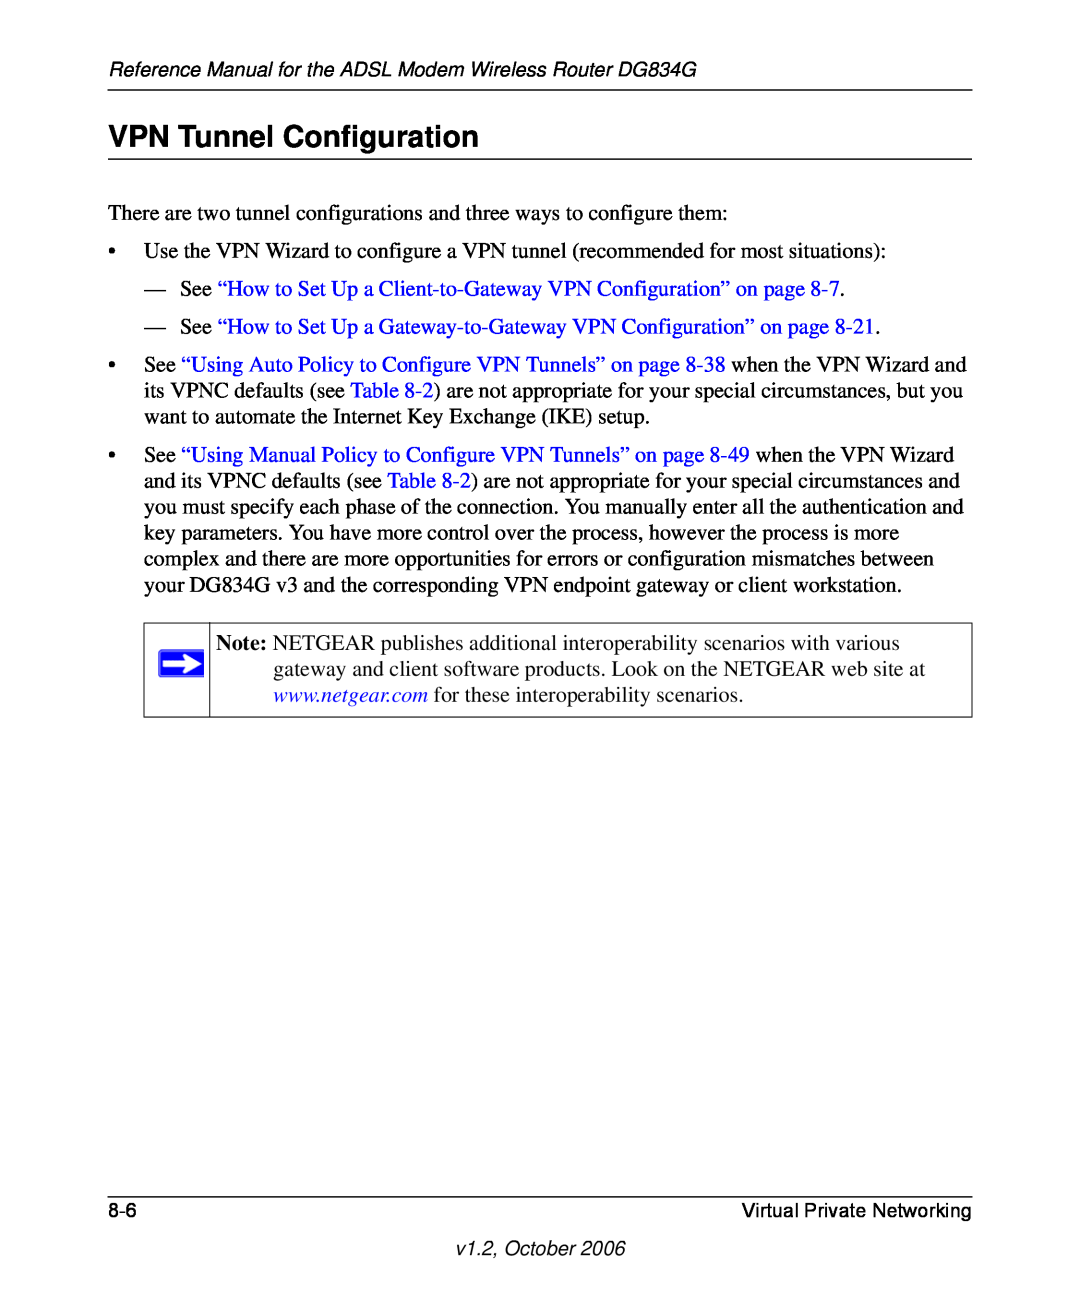 NETGEAR DG834G manual VPN Tunnel Configuration, See “How to Set Up a Client-to-Gateway VPN Configuration” on page 